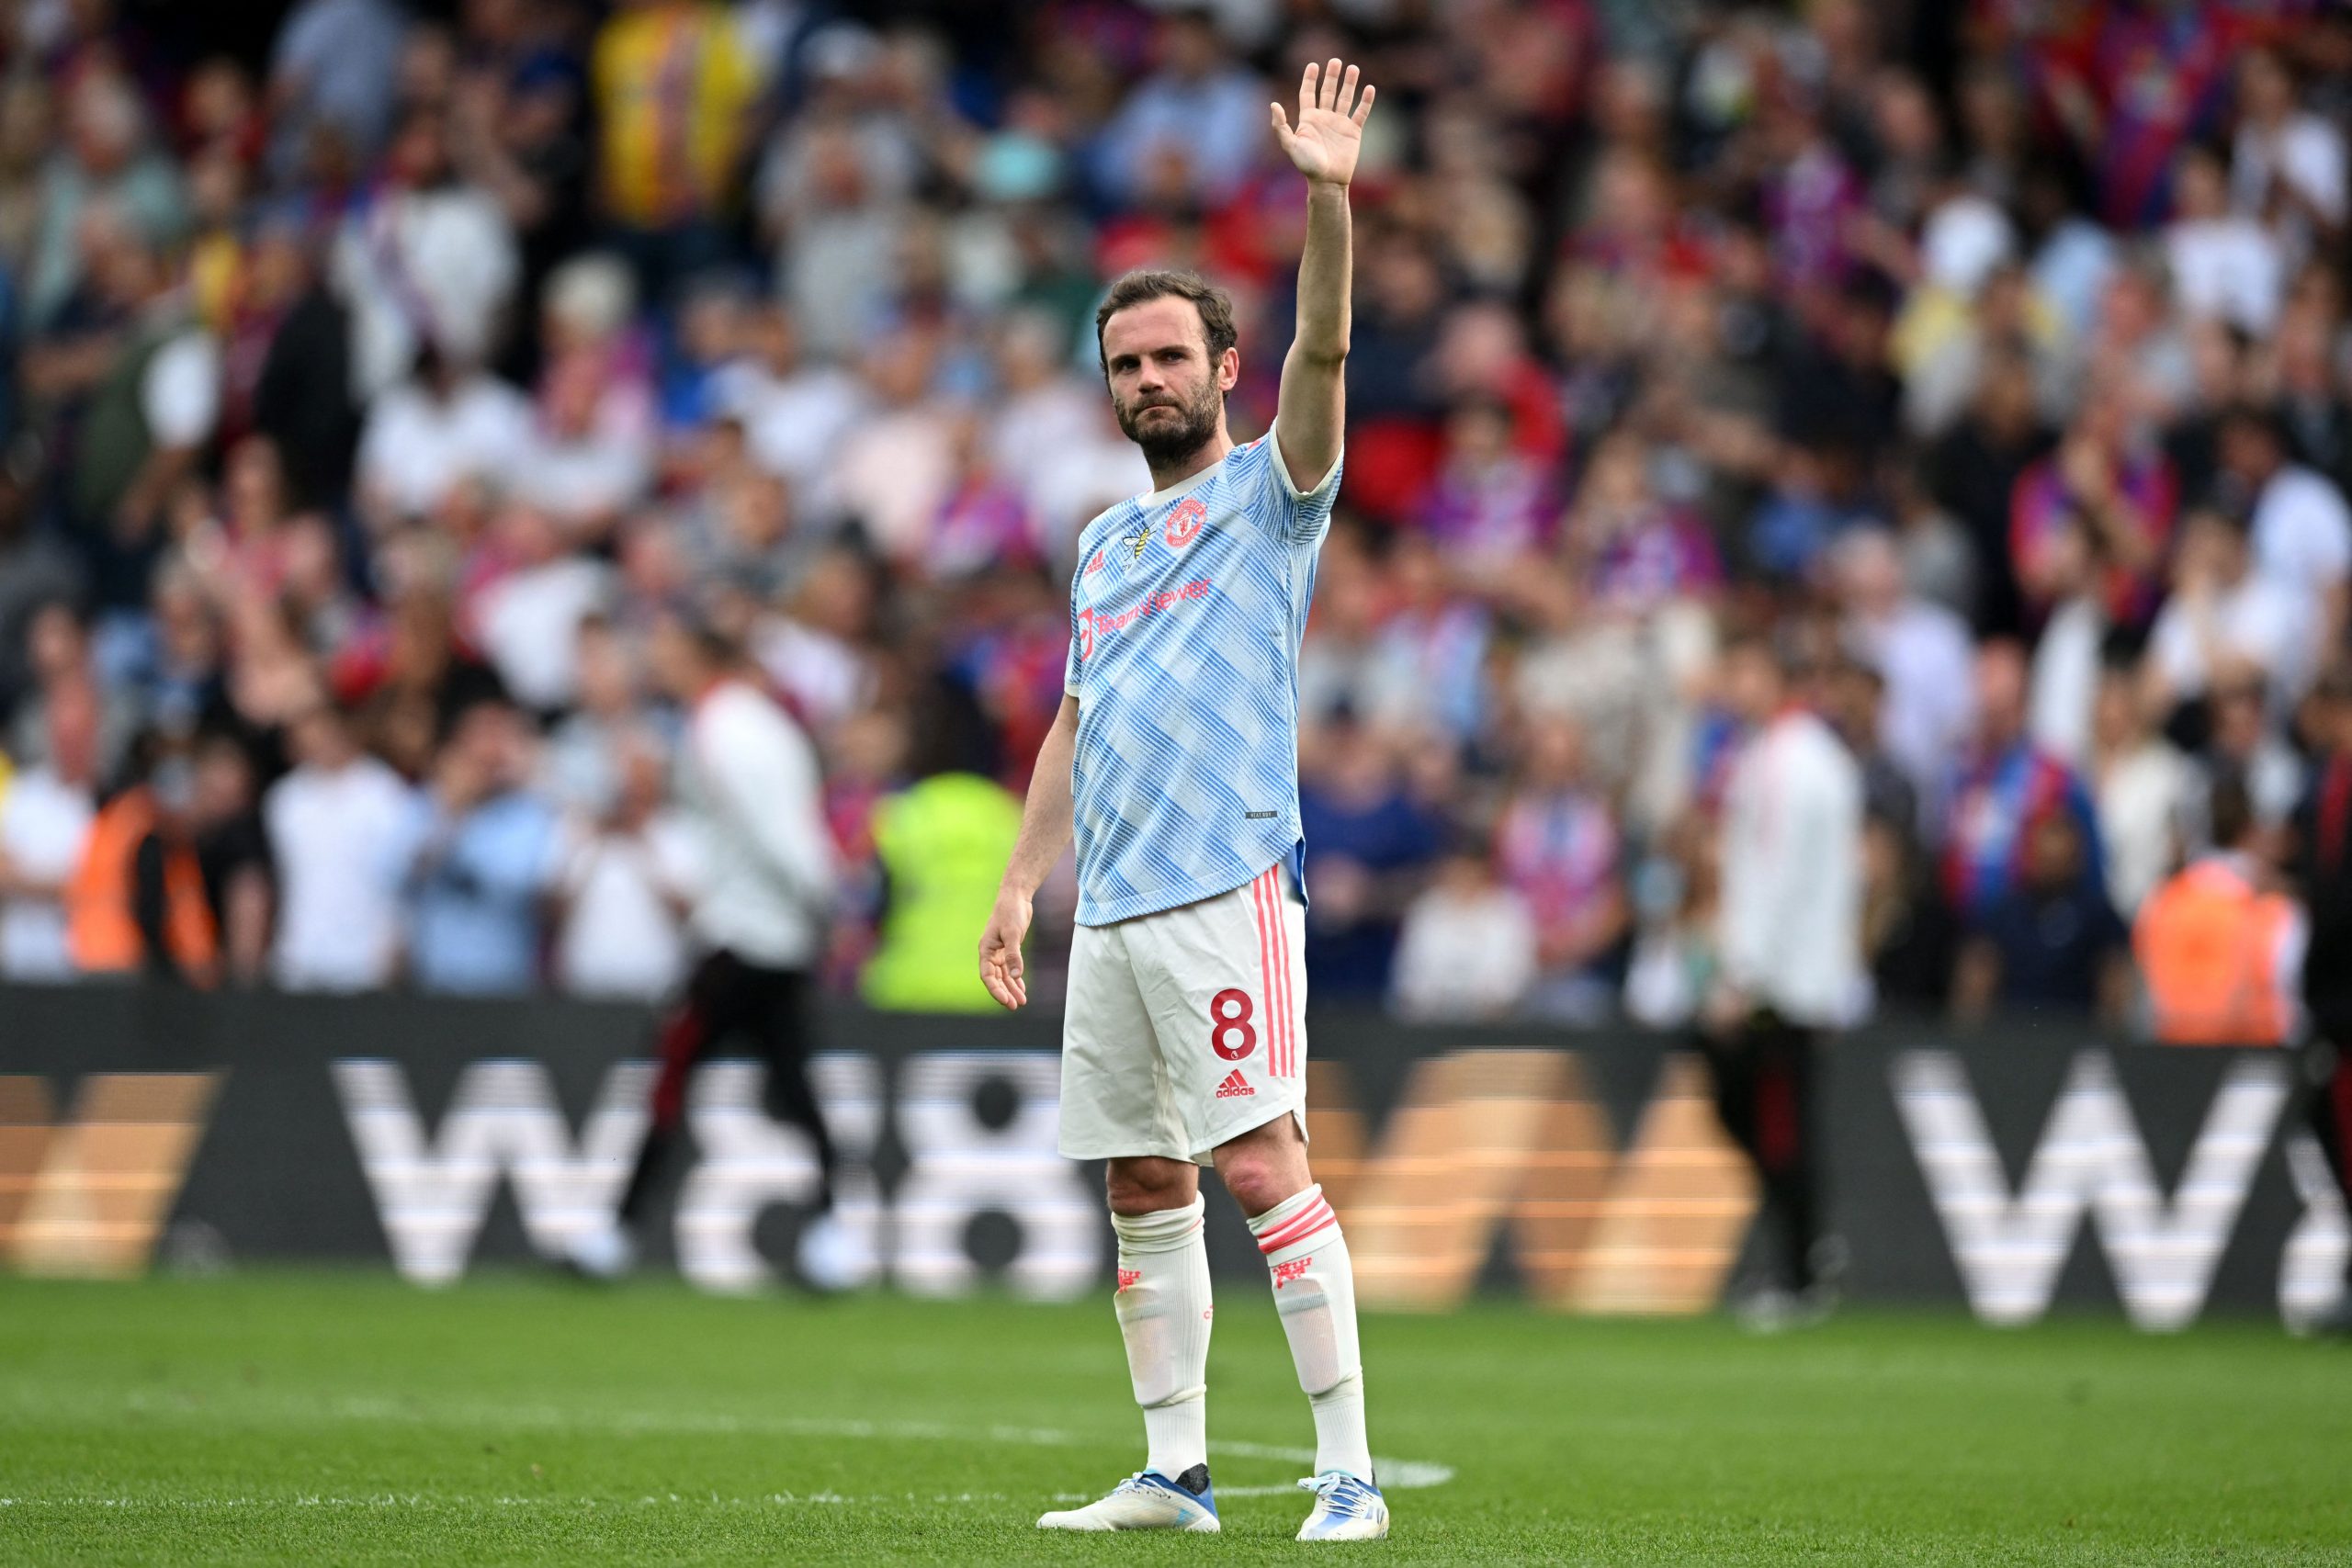 Juan Mata is willing to join another Premier League side this summer. (Photo by JUSTIN TALLIS/AFP via Getty Images)